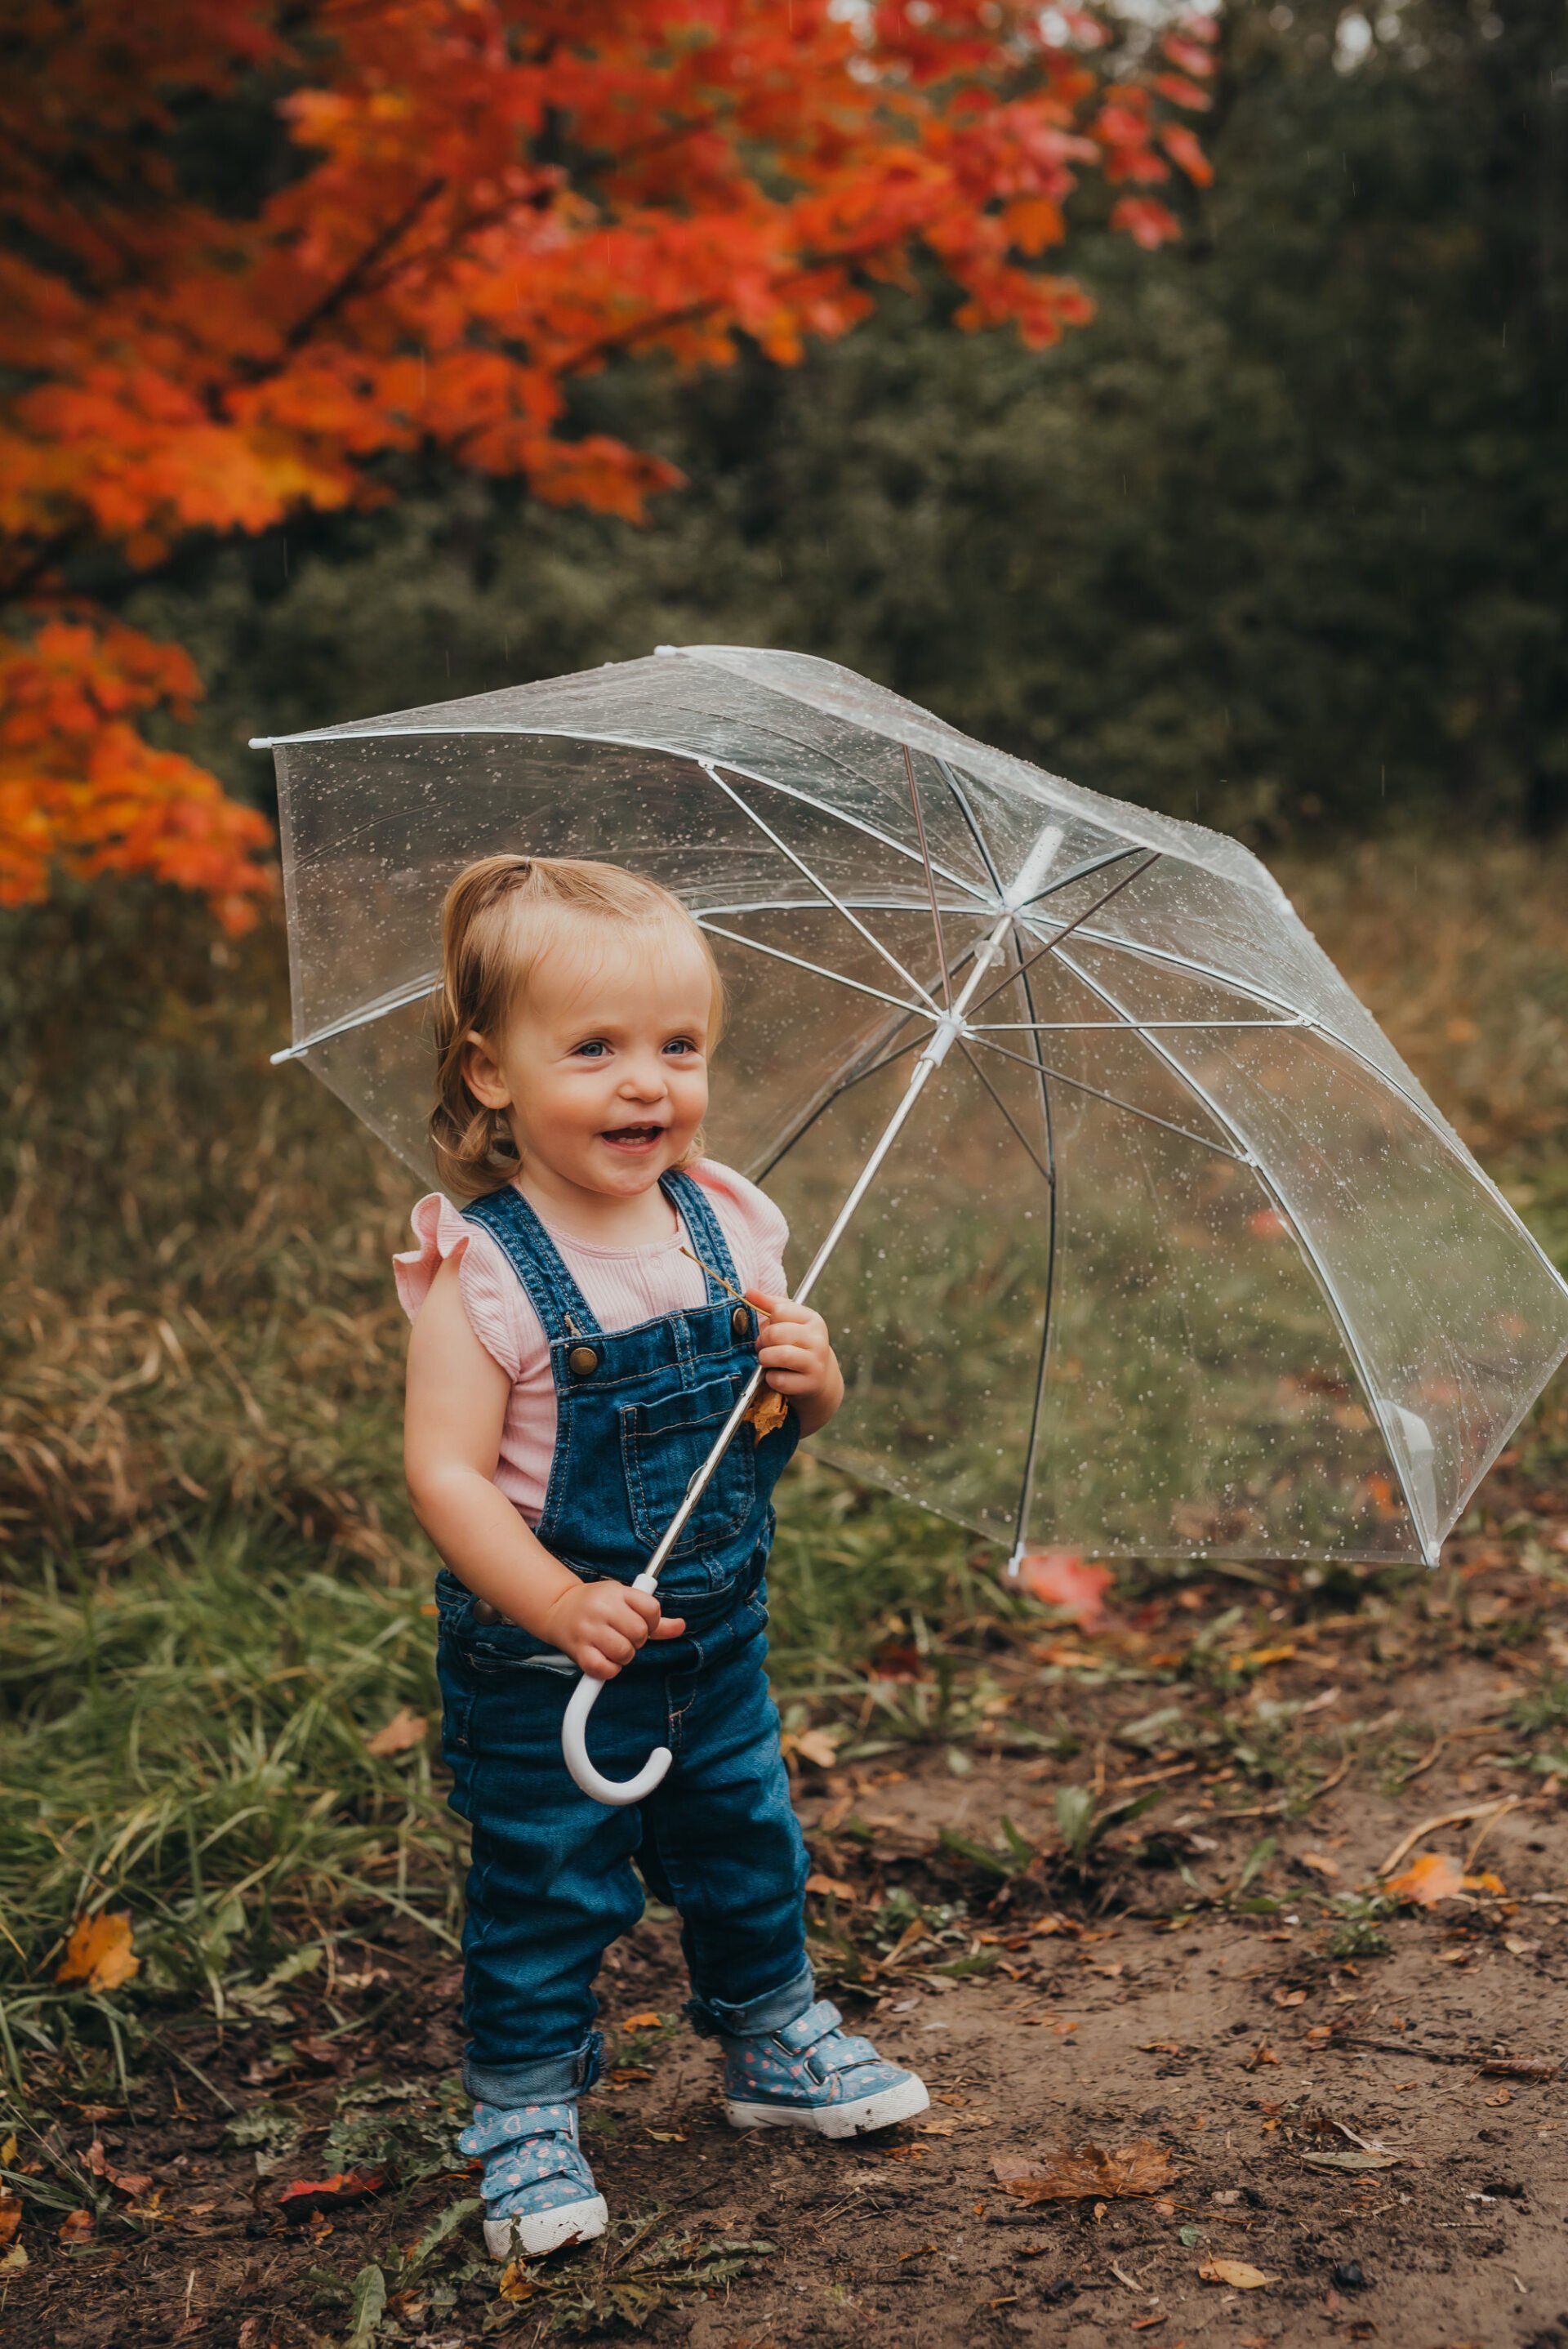 Toddler holding umbrella standing beneath tree will fall colored leaves